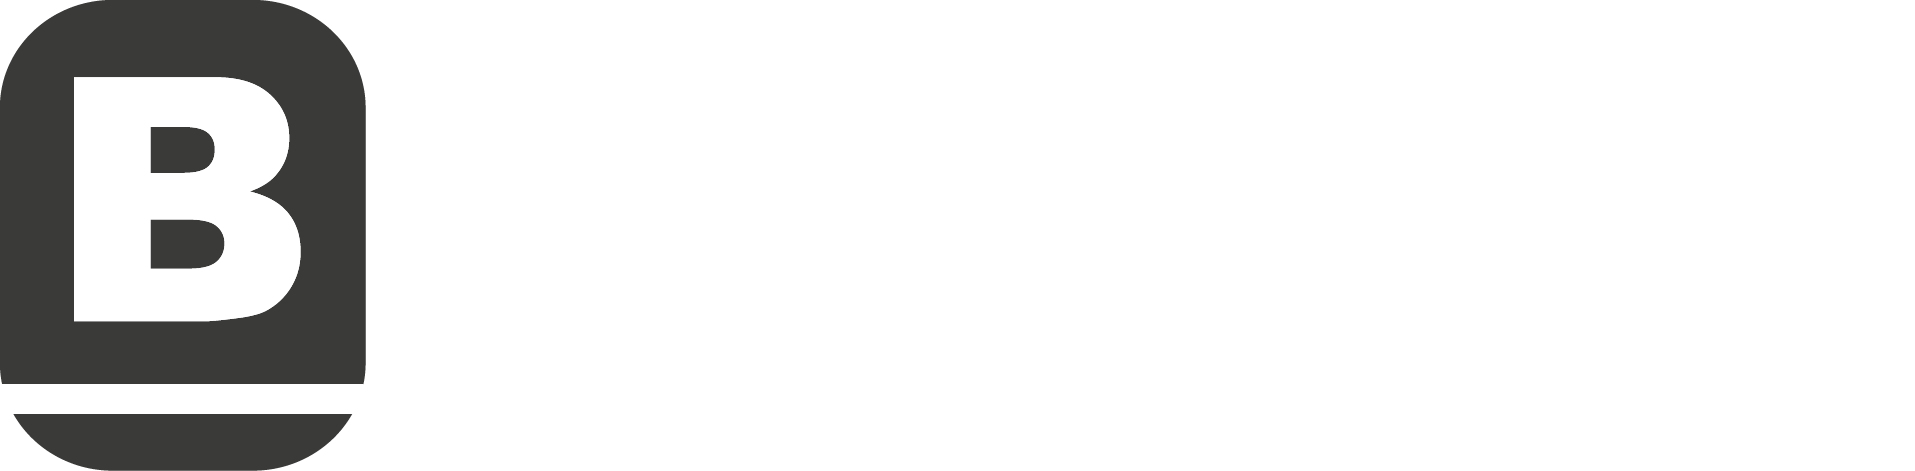 Blachford - Metal Working and Wire Drawing